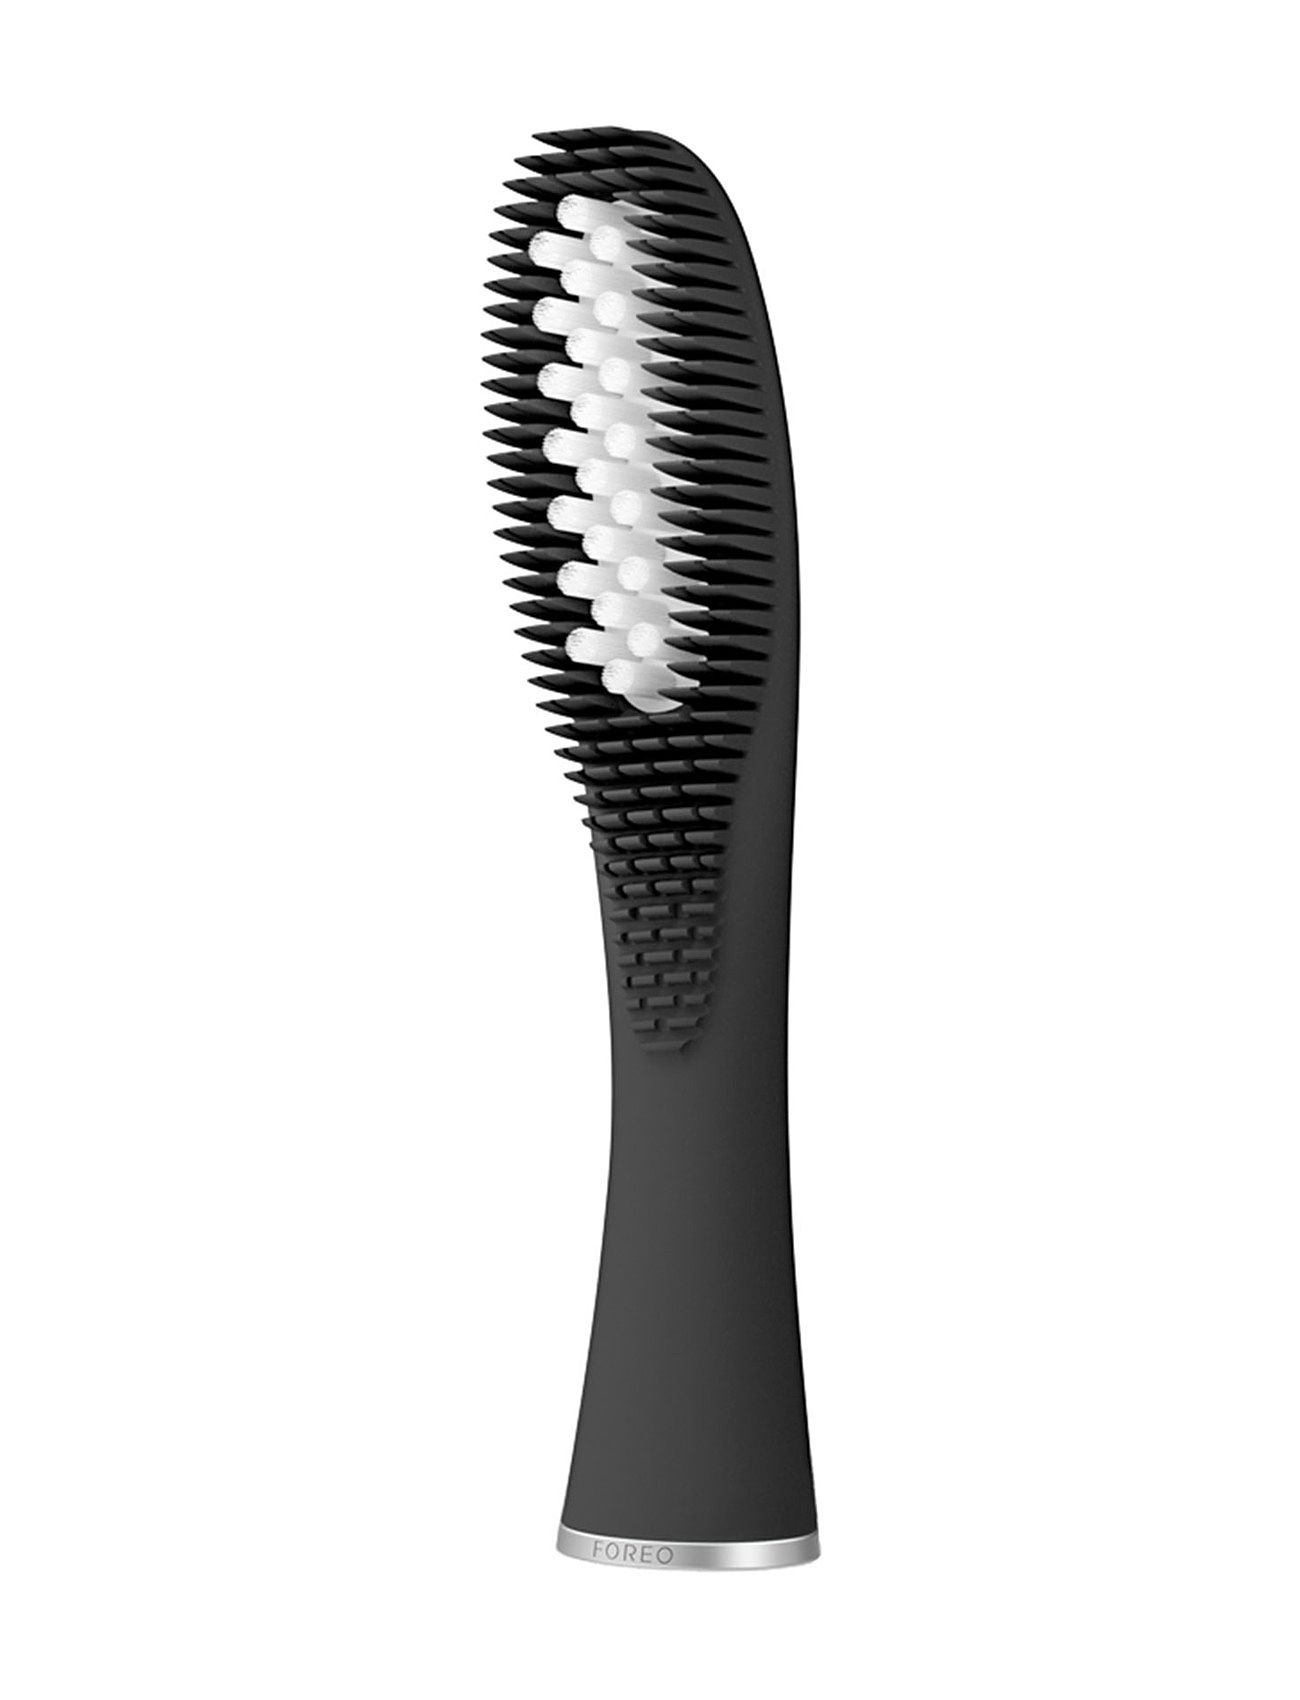 Issa™ Hybrid Wave Brush Head Beauty Women Home Oral Hygiene Toothbrushes Black Foreo